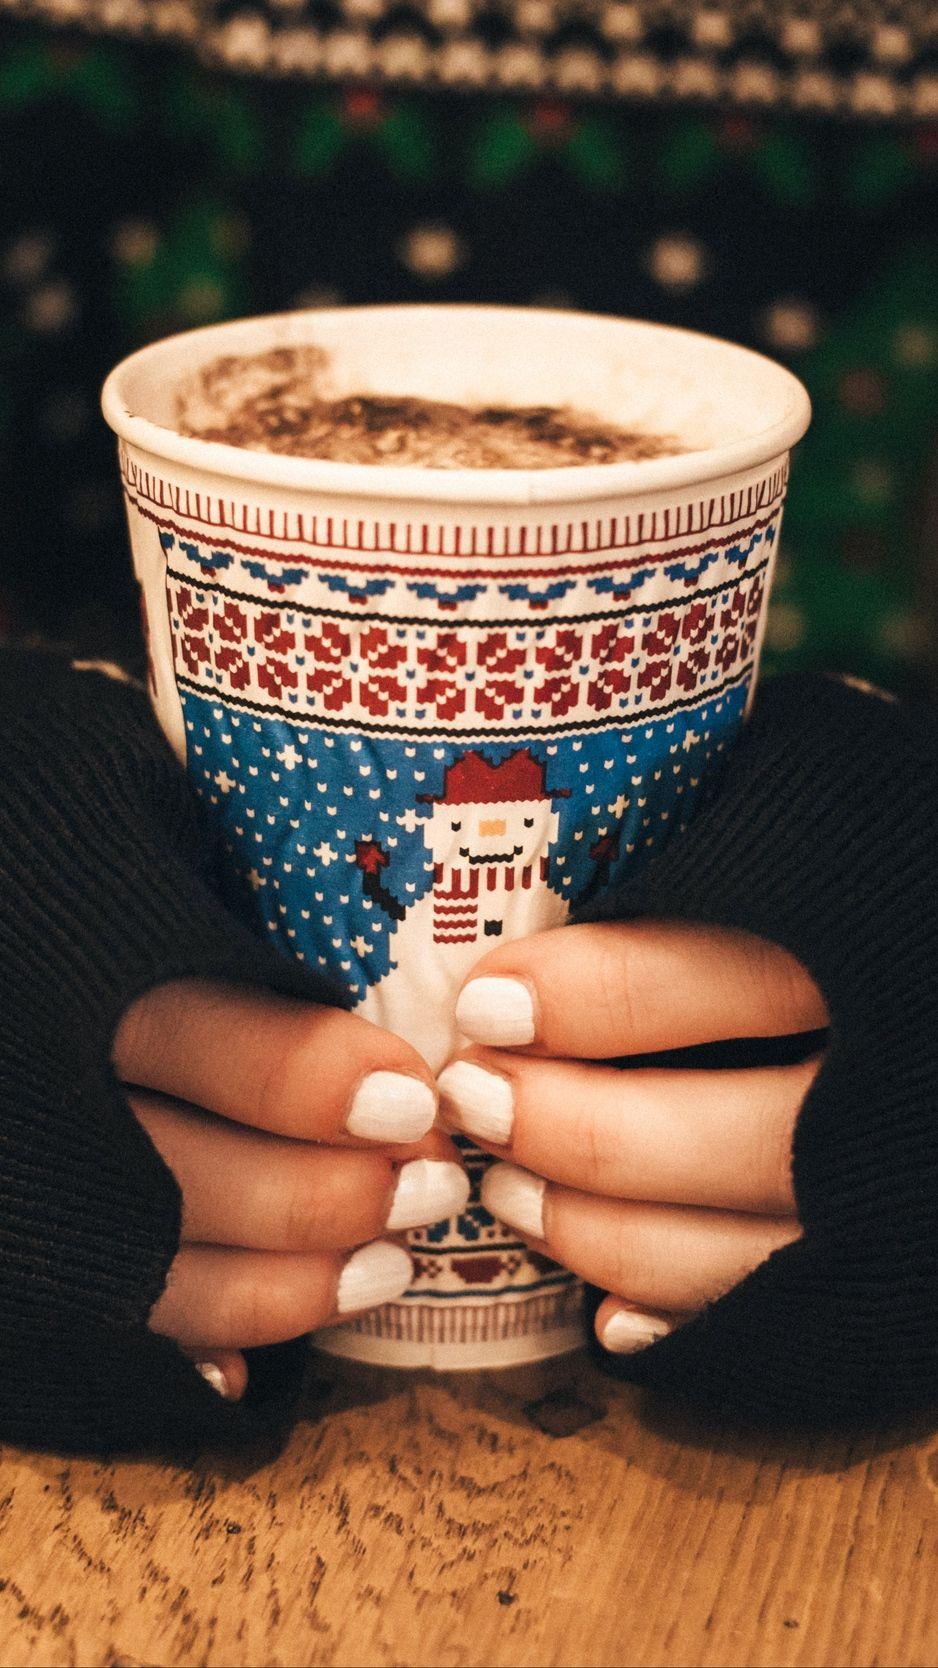 Download wallpaper 938x1668 hands, coffee, sweater, christmas iphone